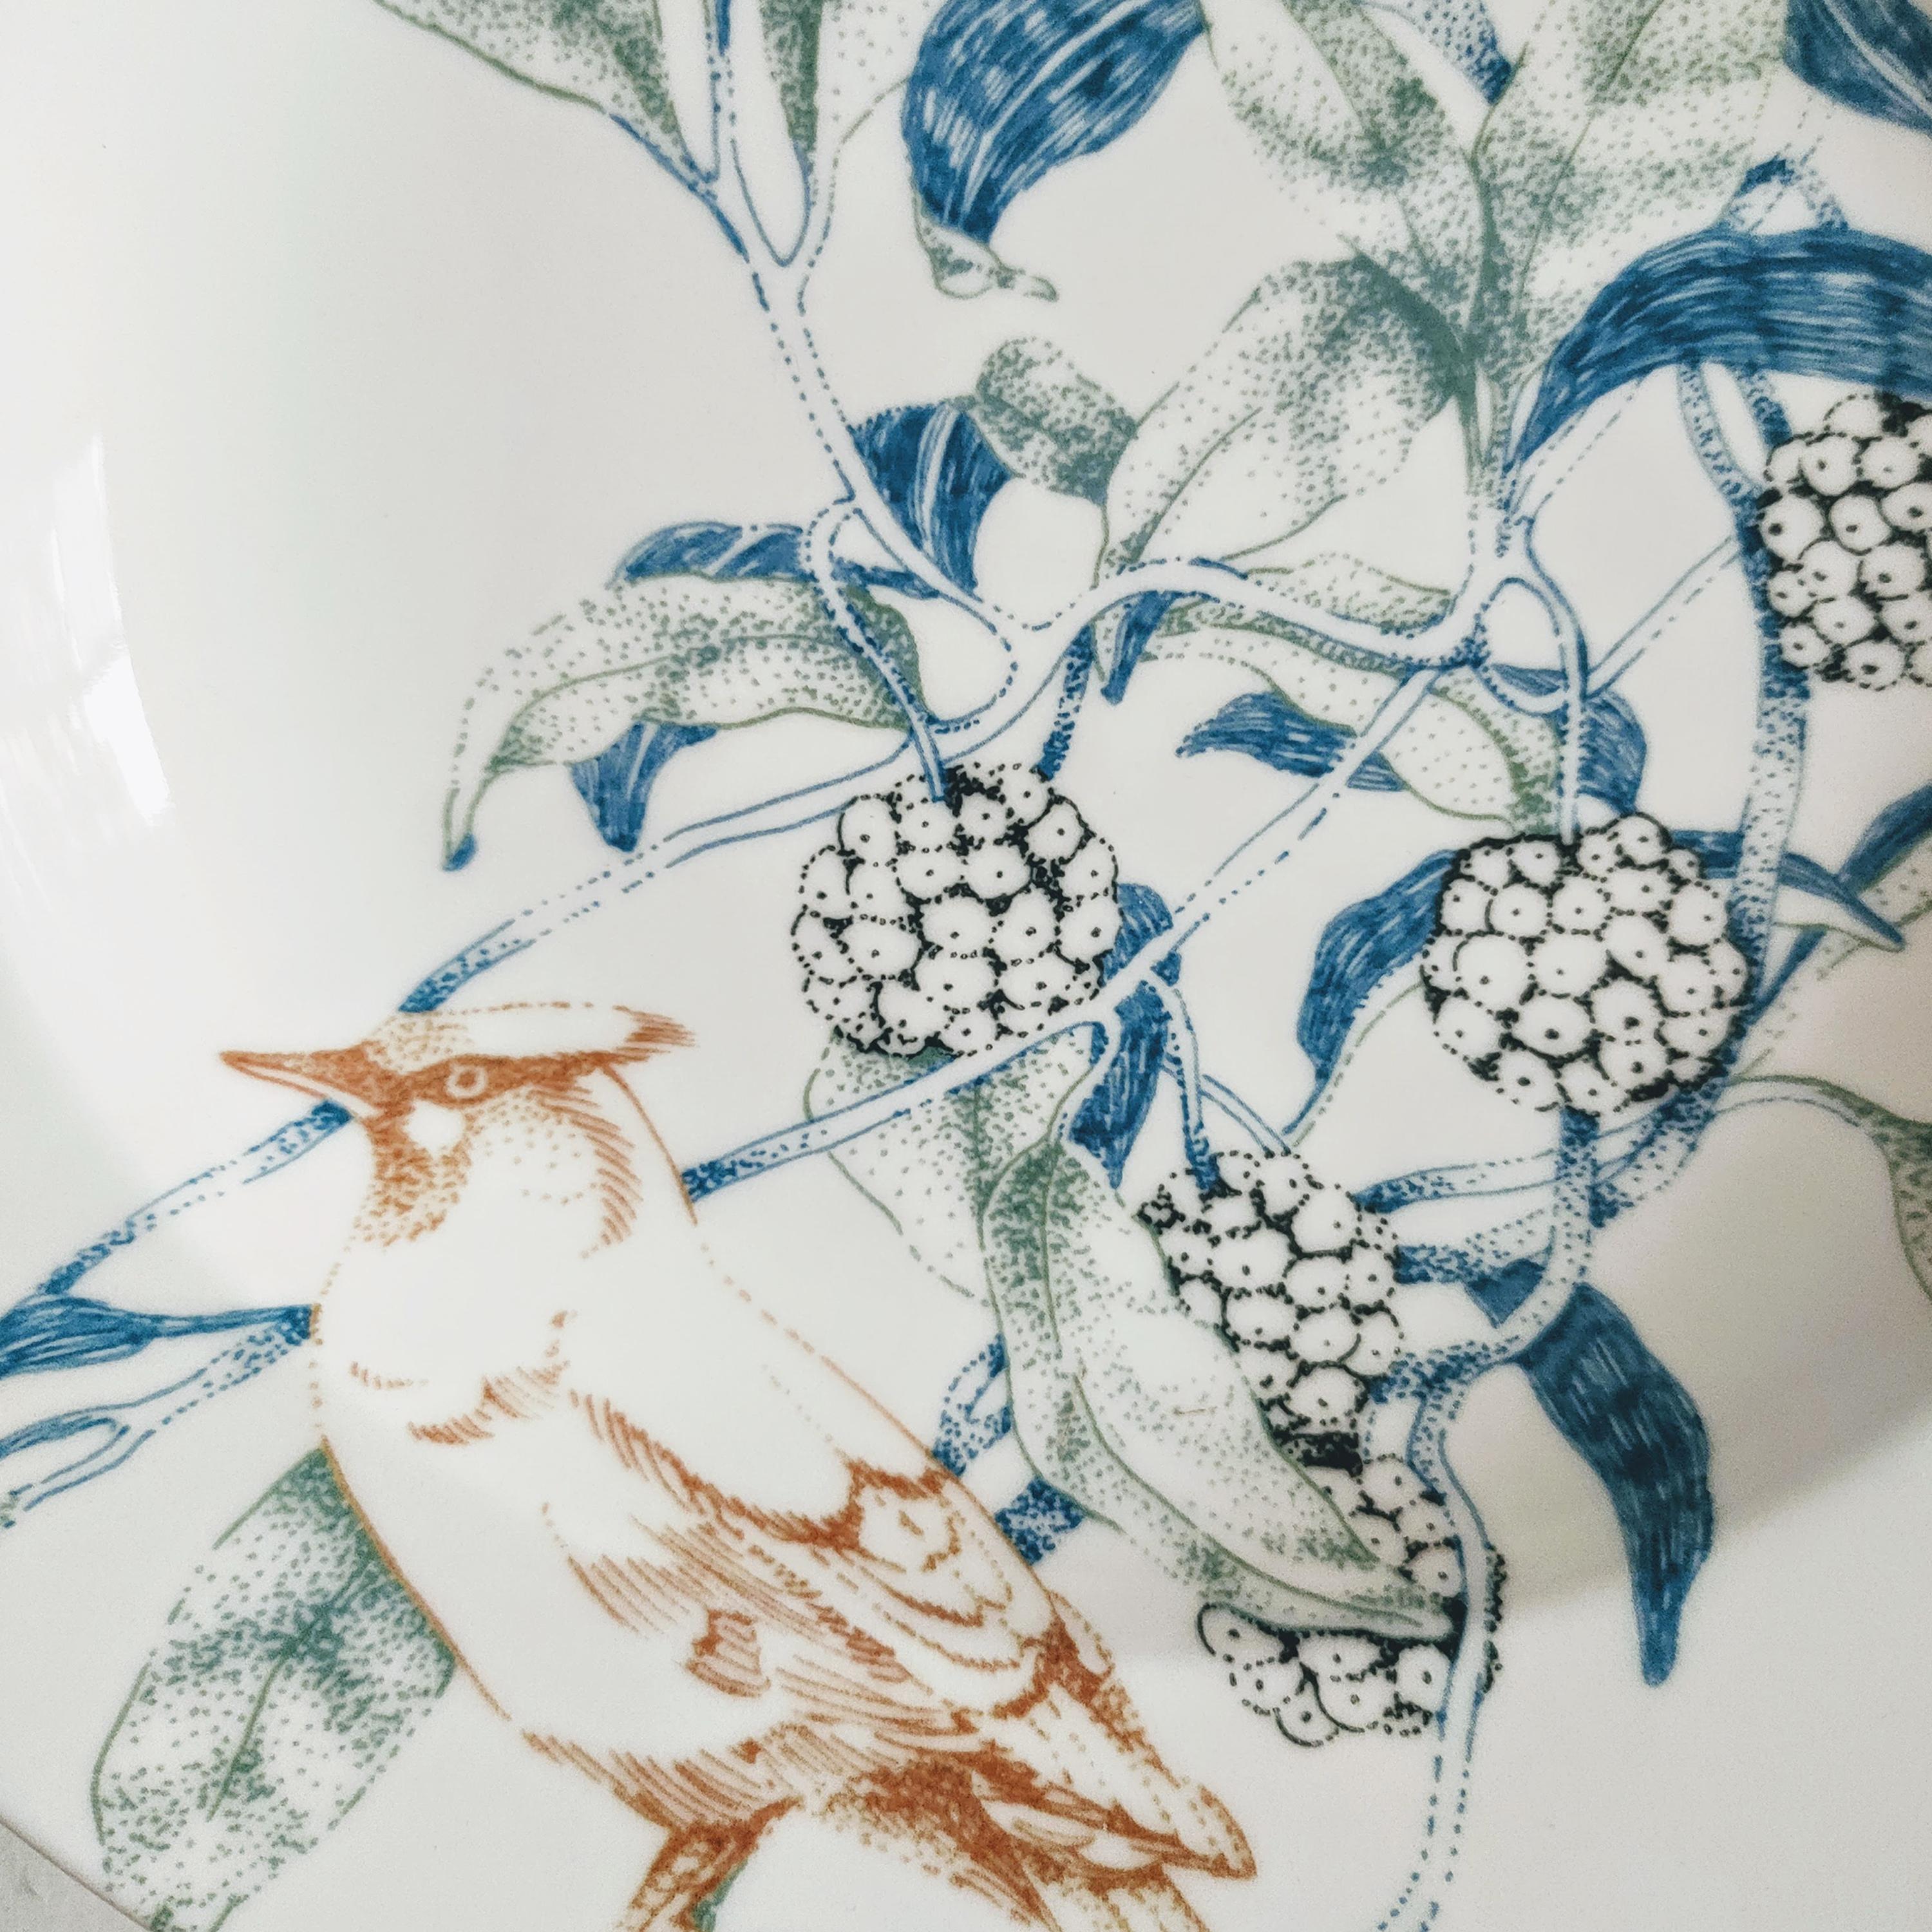 The Bird Song collection, features a design of wild birds hiding among delicate and intricate foliage in soft shades of blue, terracotta and dusty green. Originally created using the 'pointillism' technique, each scene, illustrated in detail,